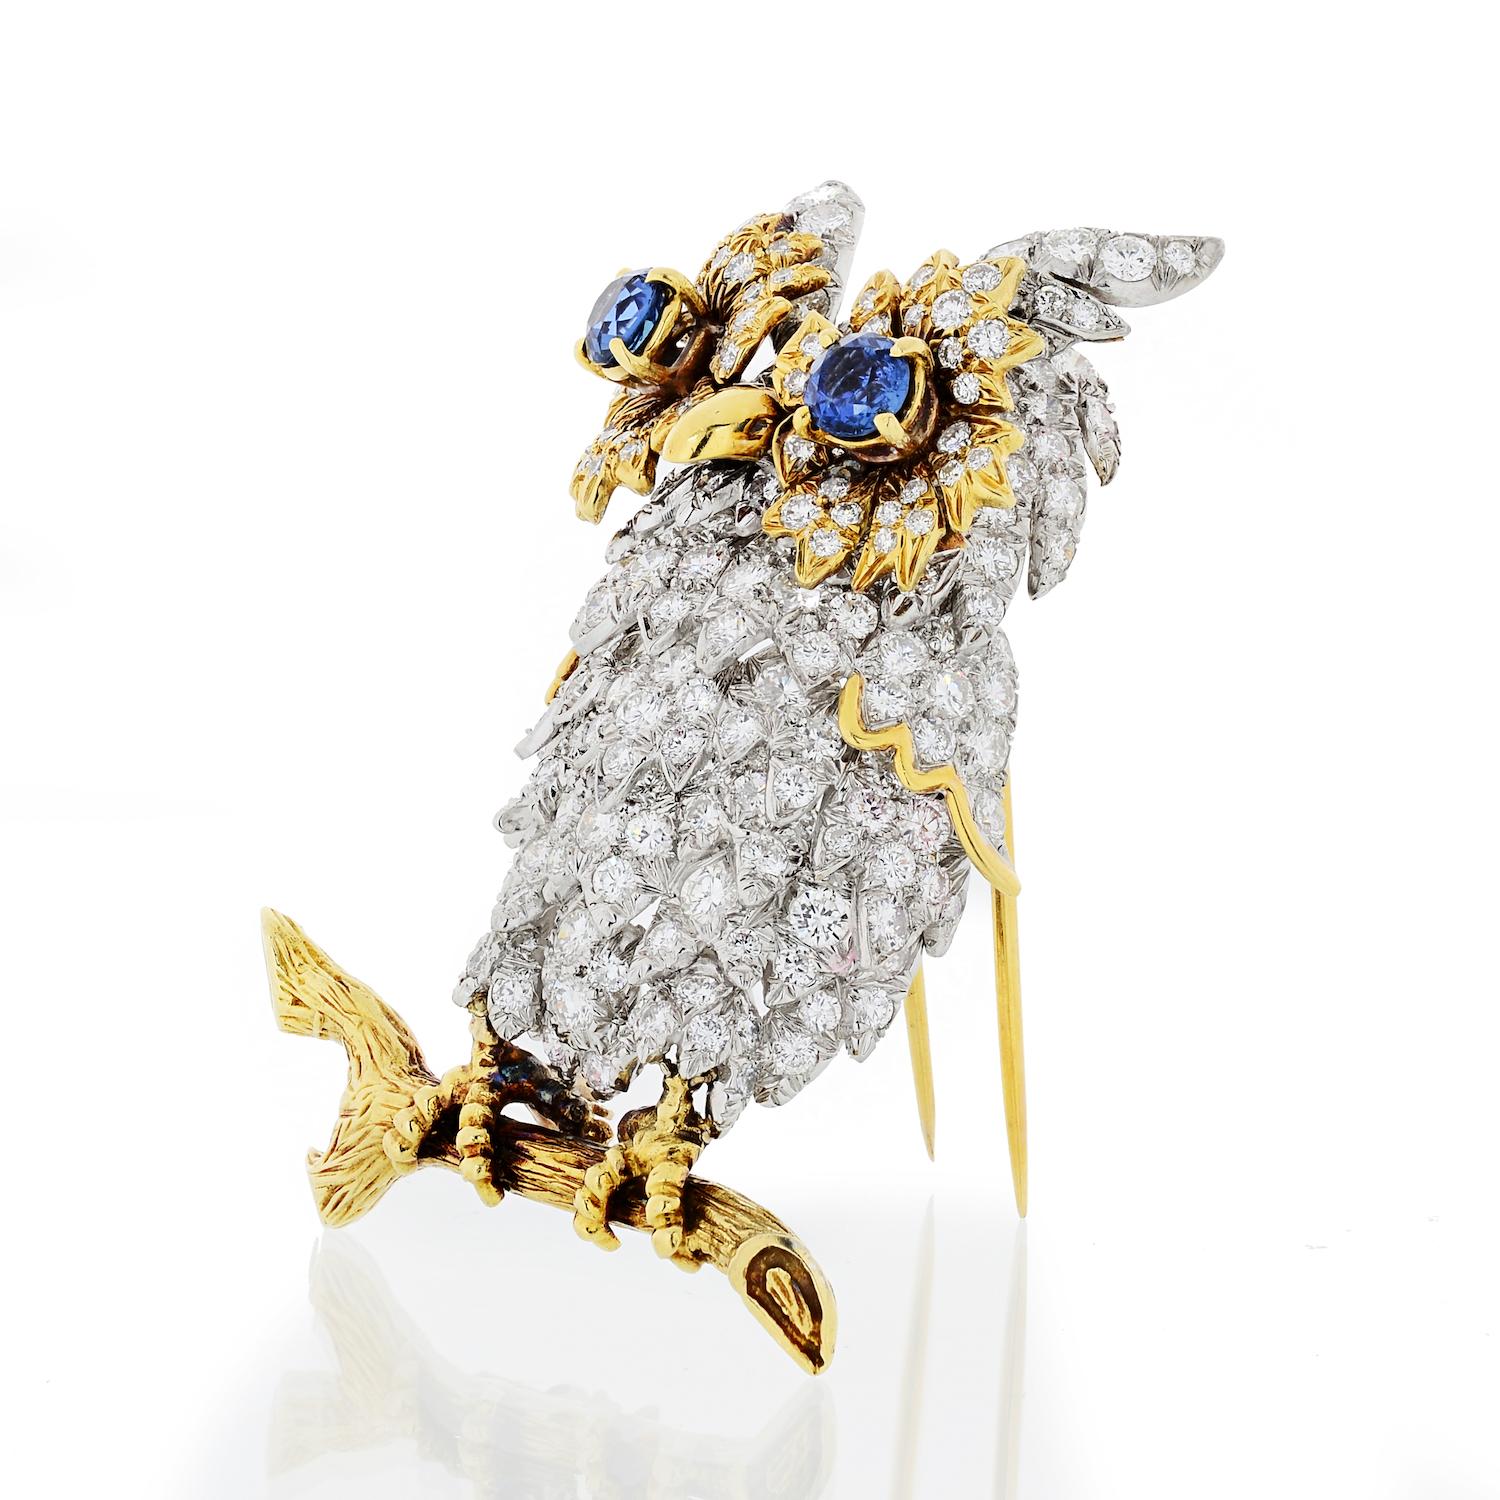 Beautiful and friendly this vintage Hammerman Brothers 18k yellow and Platinum Owl brooch with Diamond pave body and genuine blue gemstones. She is sitting on a branch just a real owl in wild. Hammerman Brothers are known for their exceptional